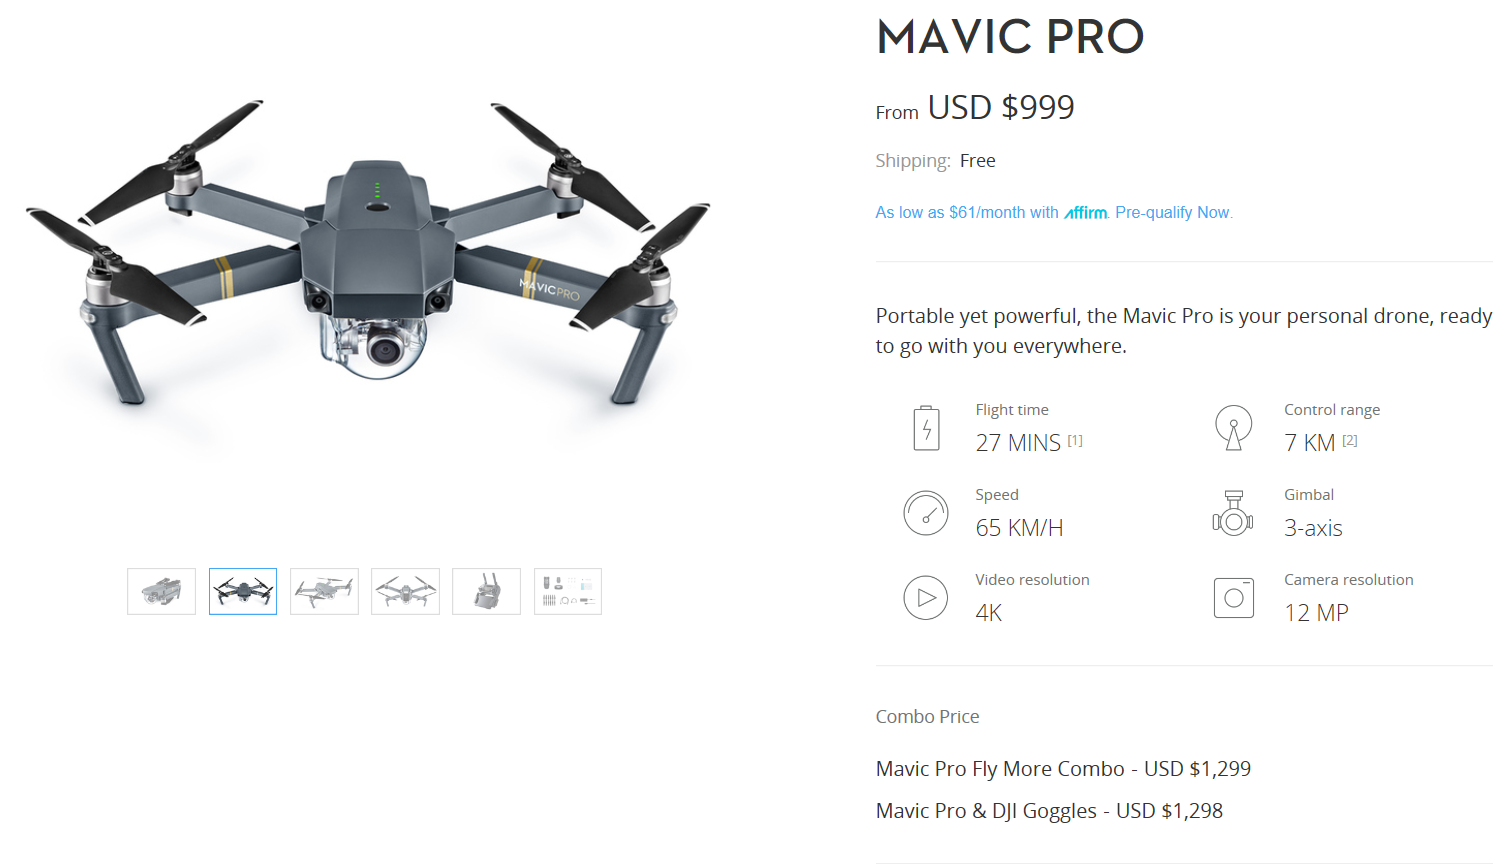 This is the drone I ordered.